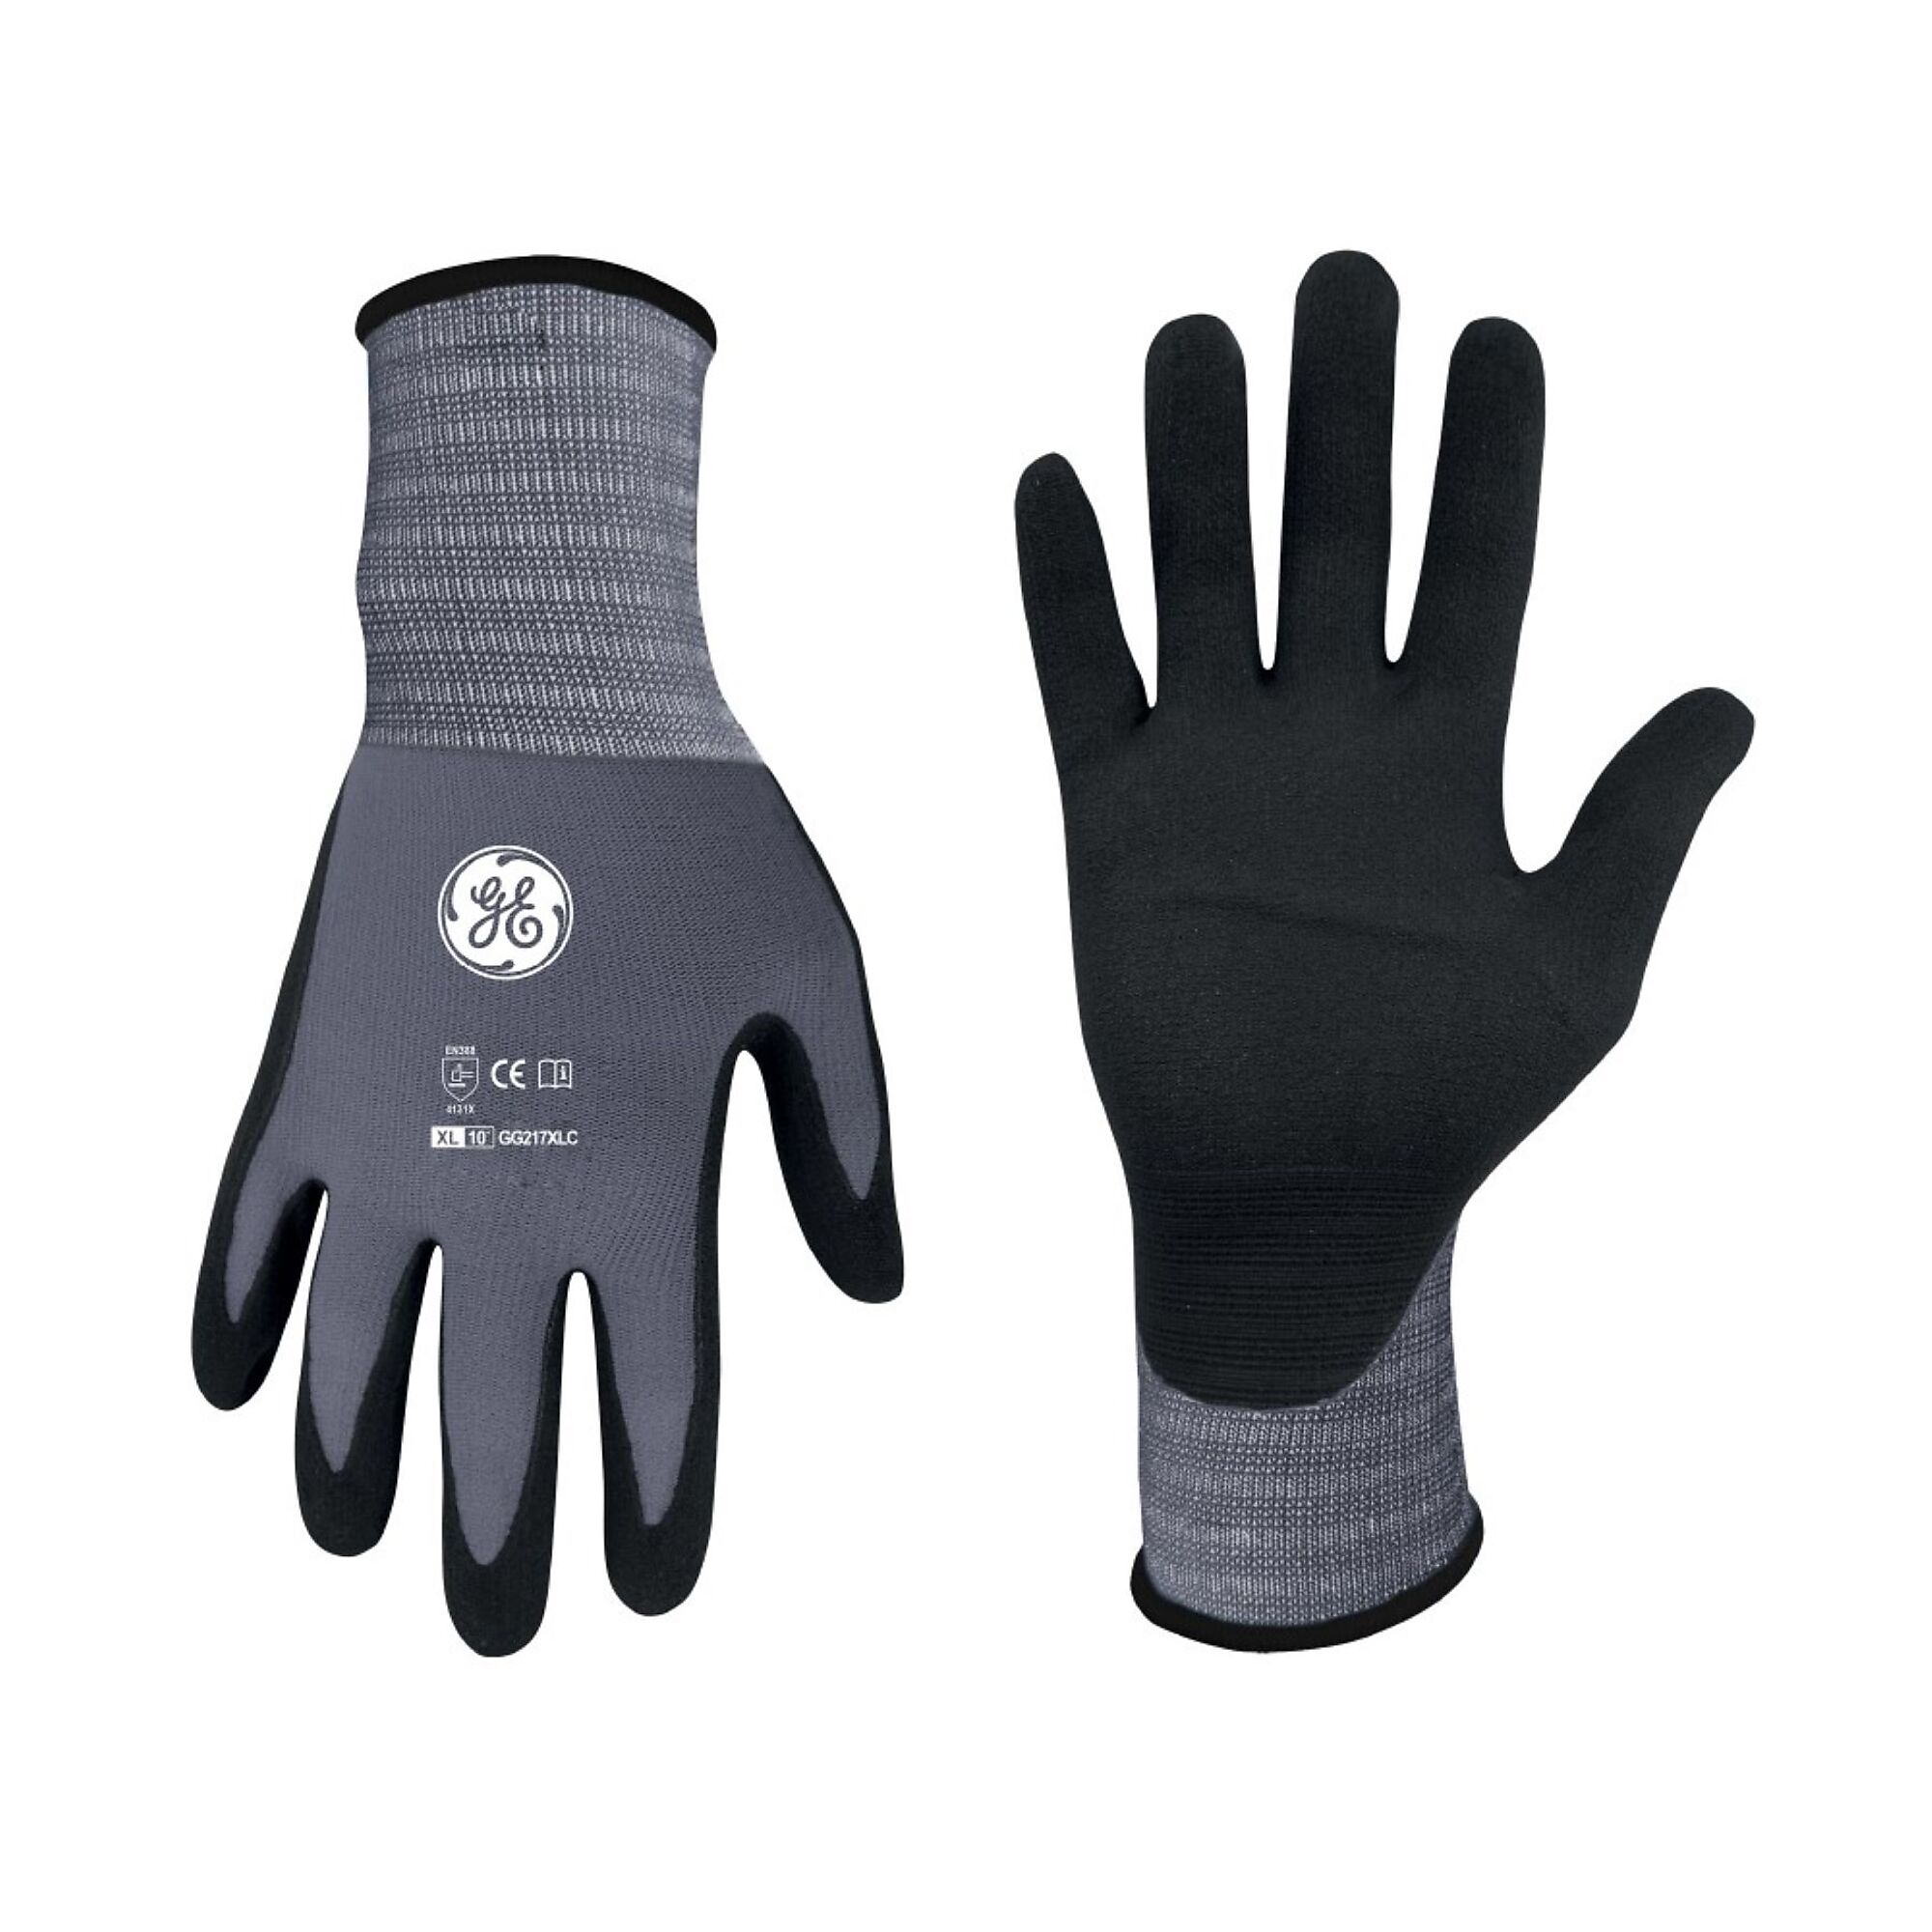 General Electric, Unisex Dipped Gloves Black/Gray XL 12 pair, Size XL, Included (qty.) 12, Model GG217XL